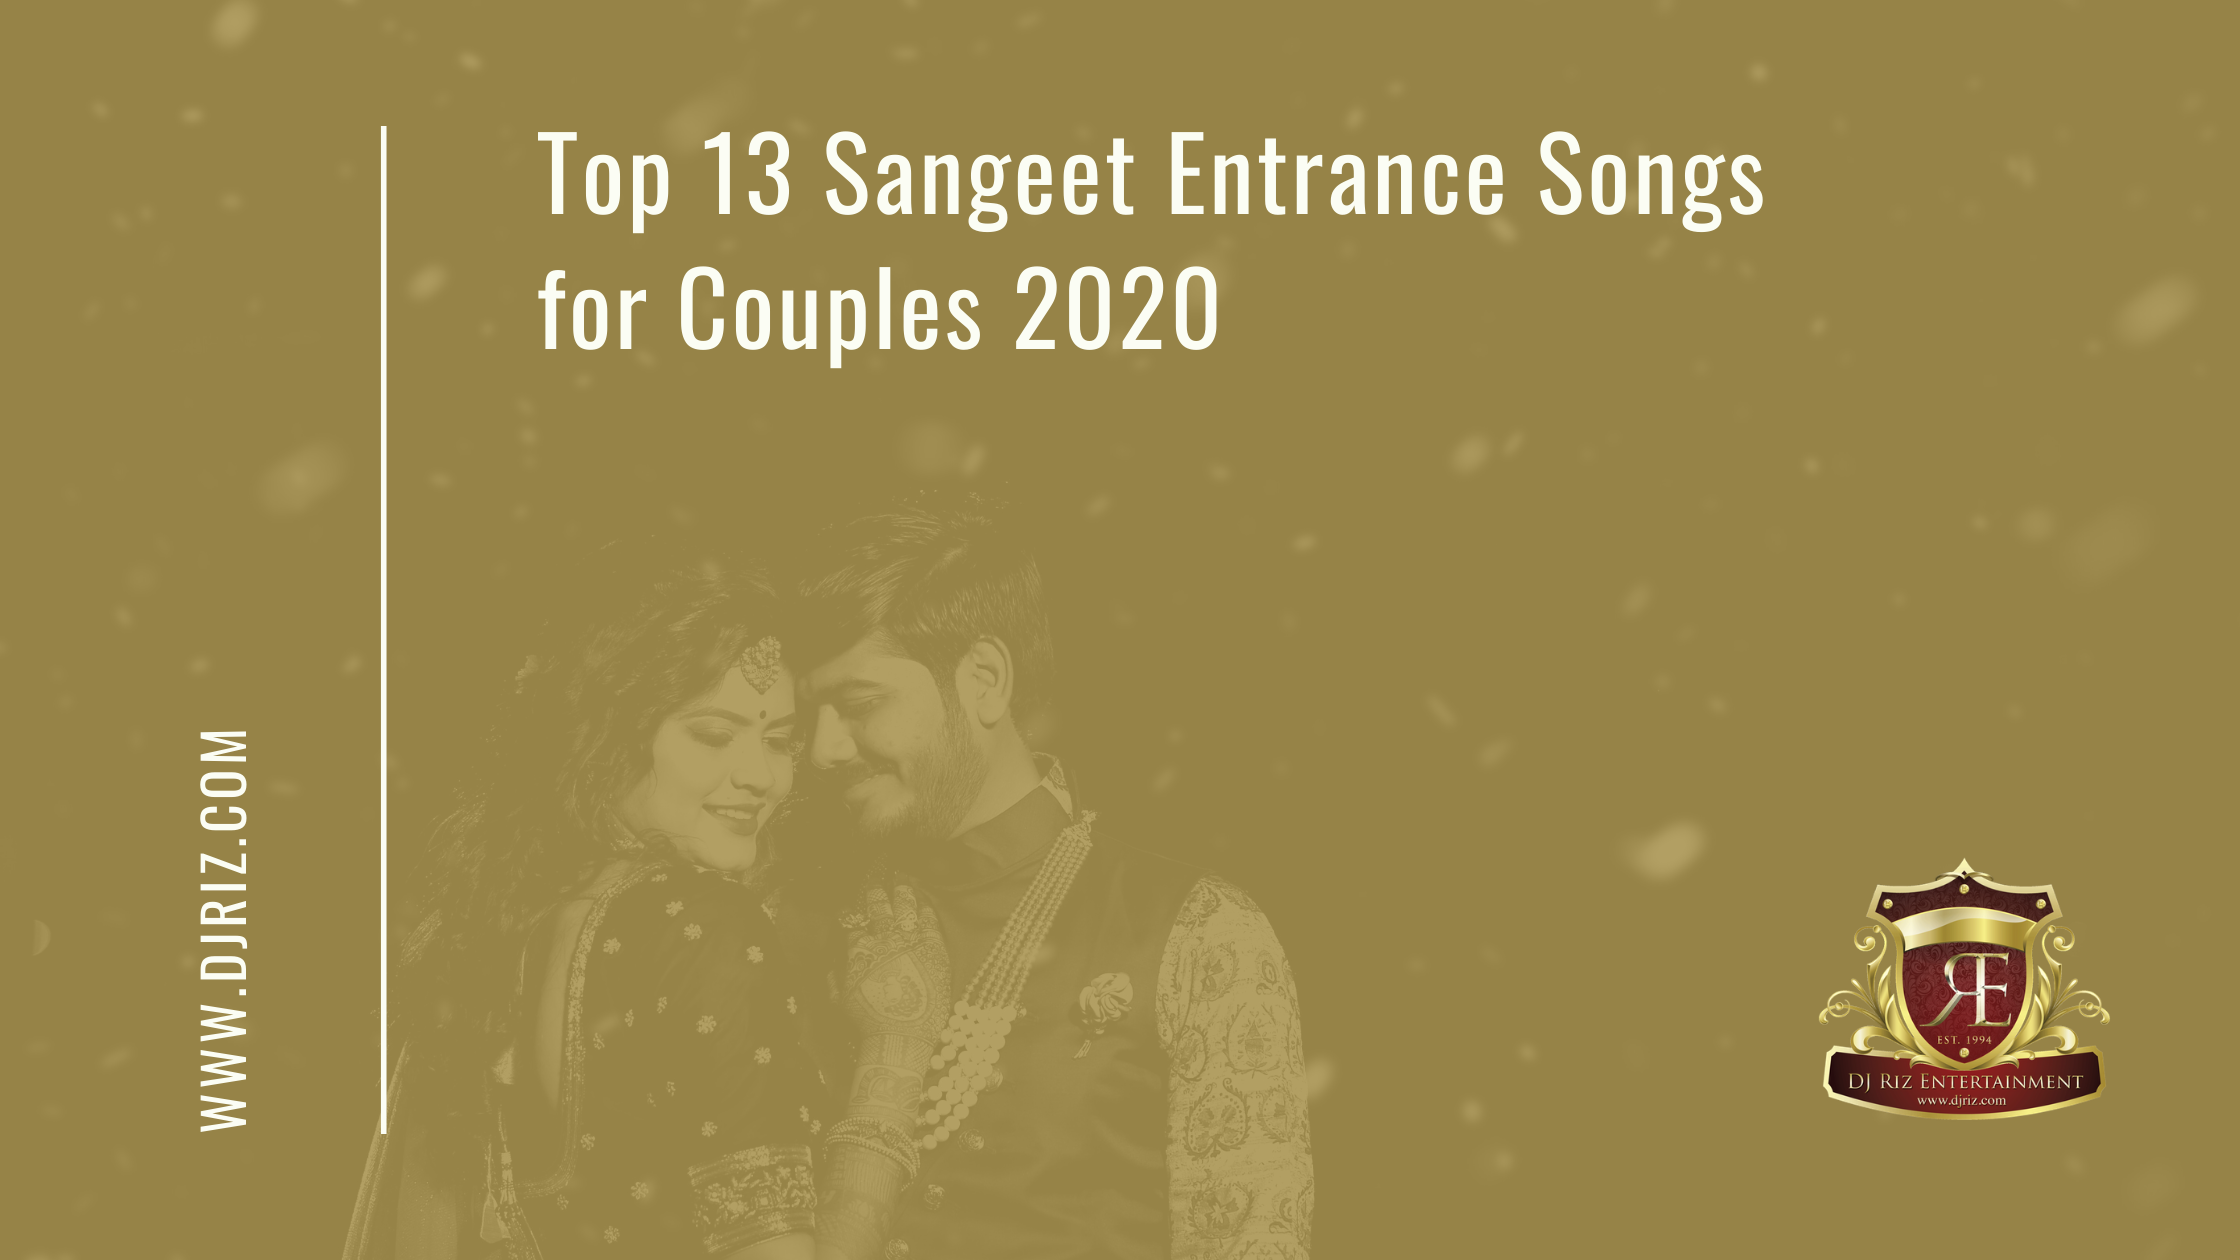 Sangeet Entrance songs for couples 2020